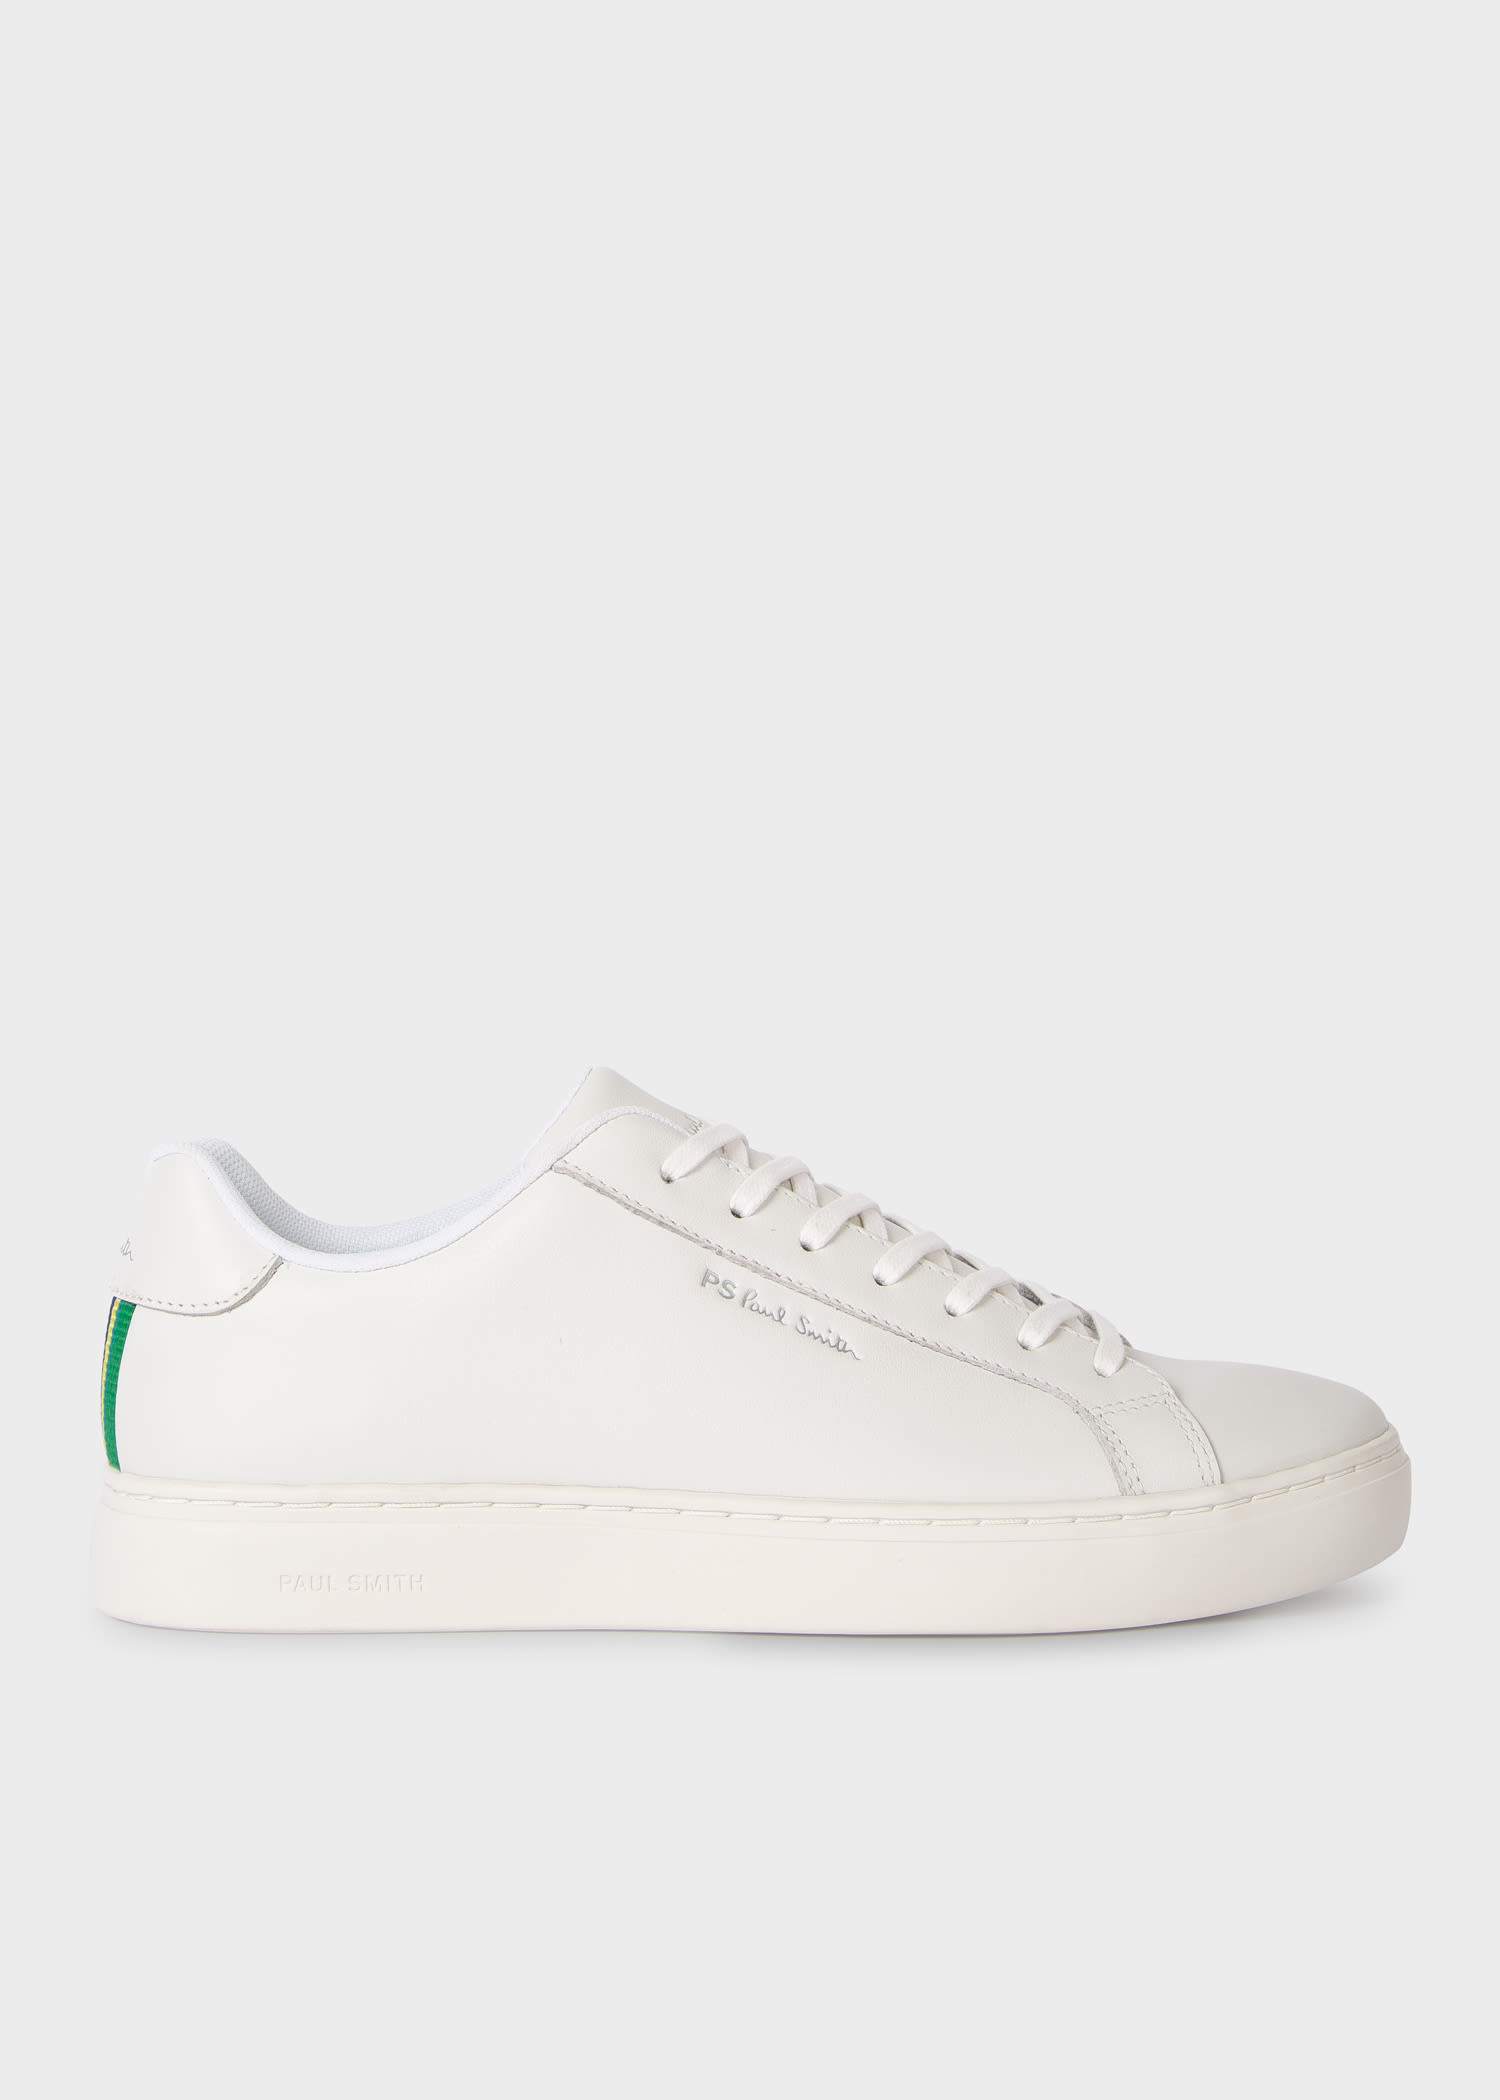 Paul Smith White Leather 'Rex' Trainers Shoes | Heathrow Reserve & Collect